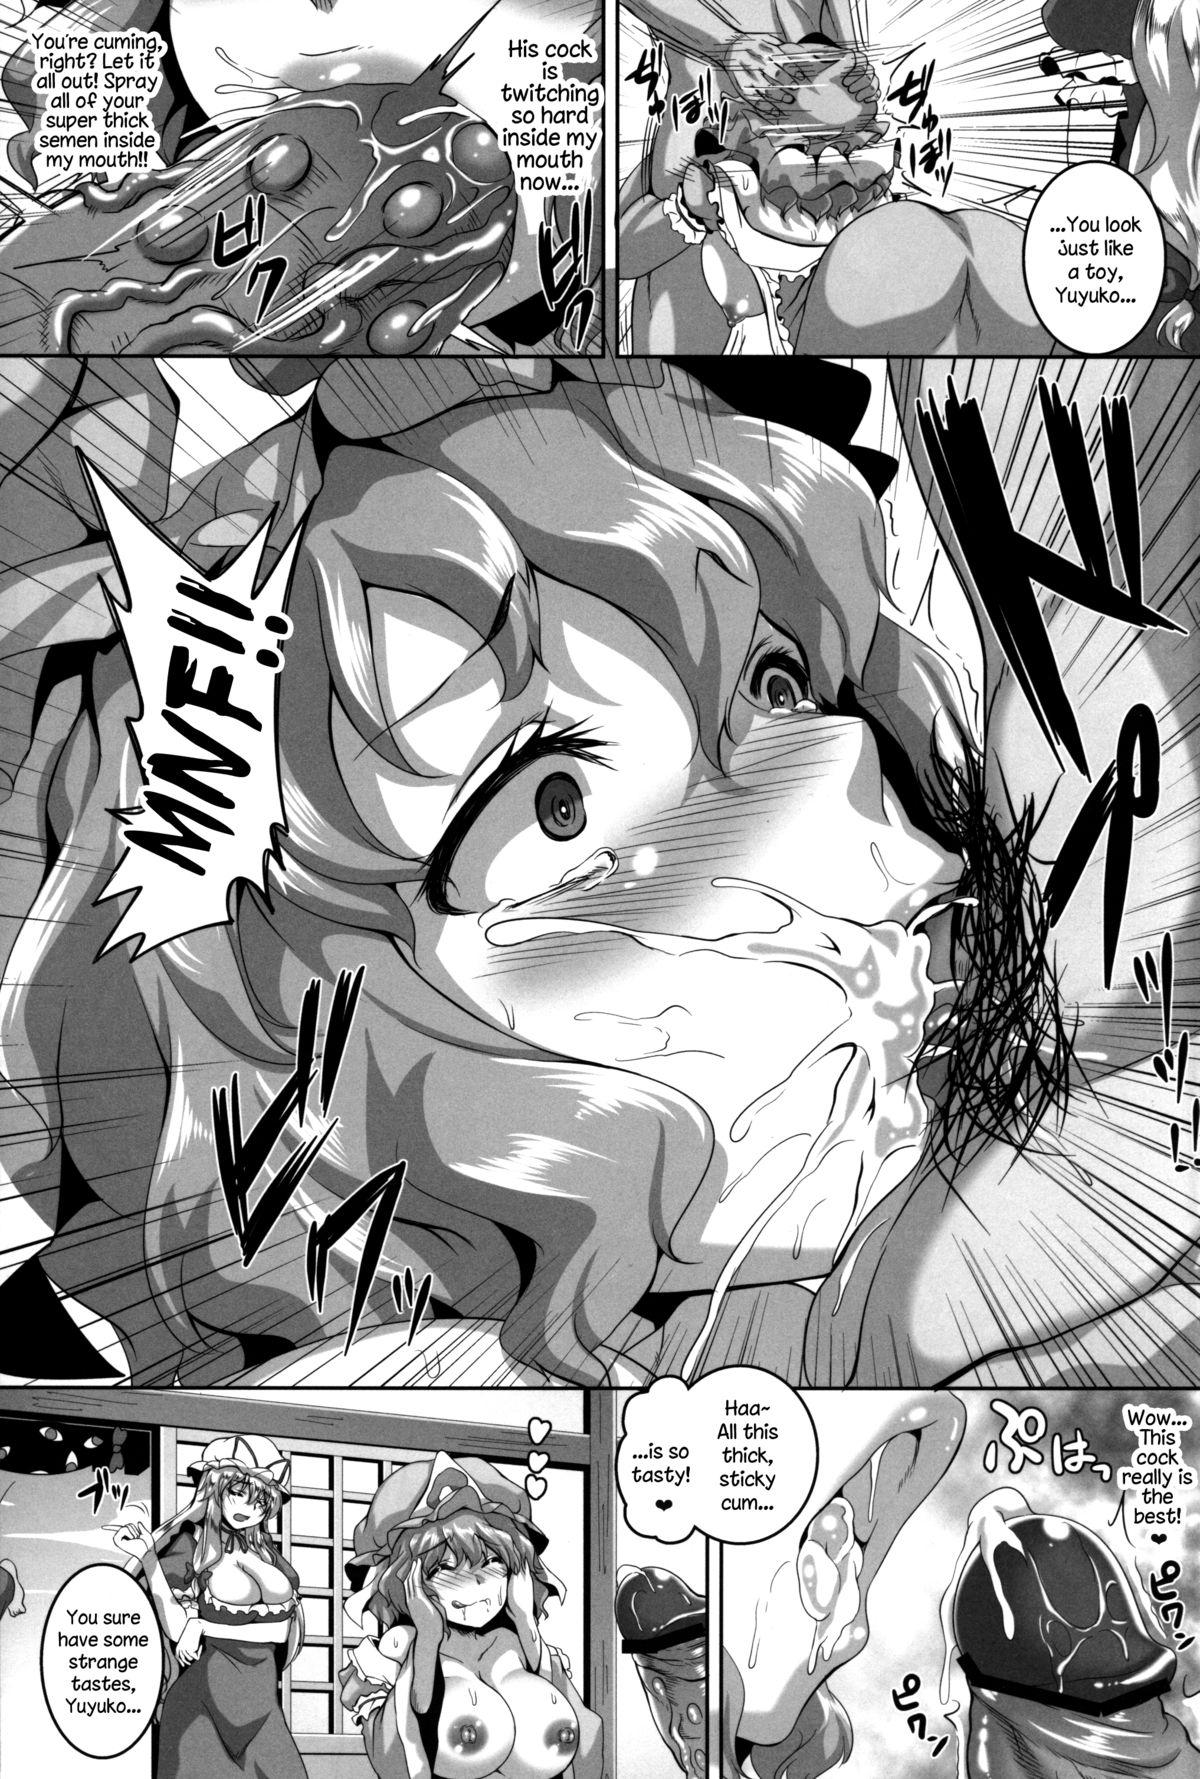 Sapphic Erotica Nymphomaniac Games - Touhou project Tinytits - Page 6